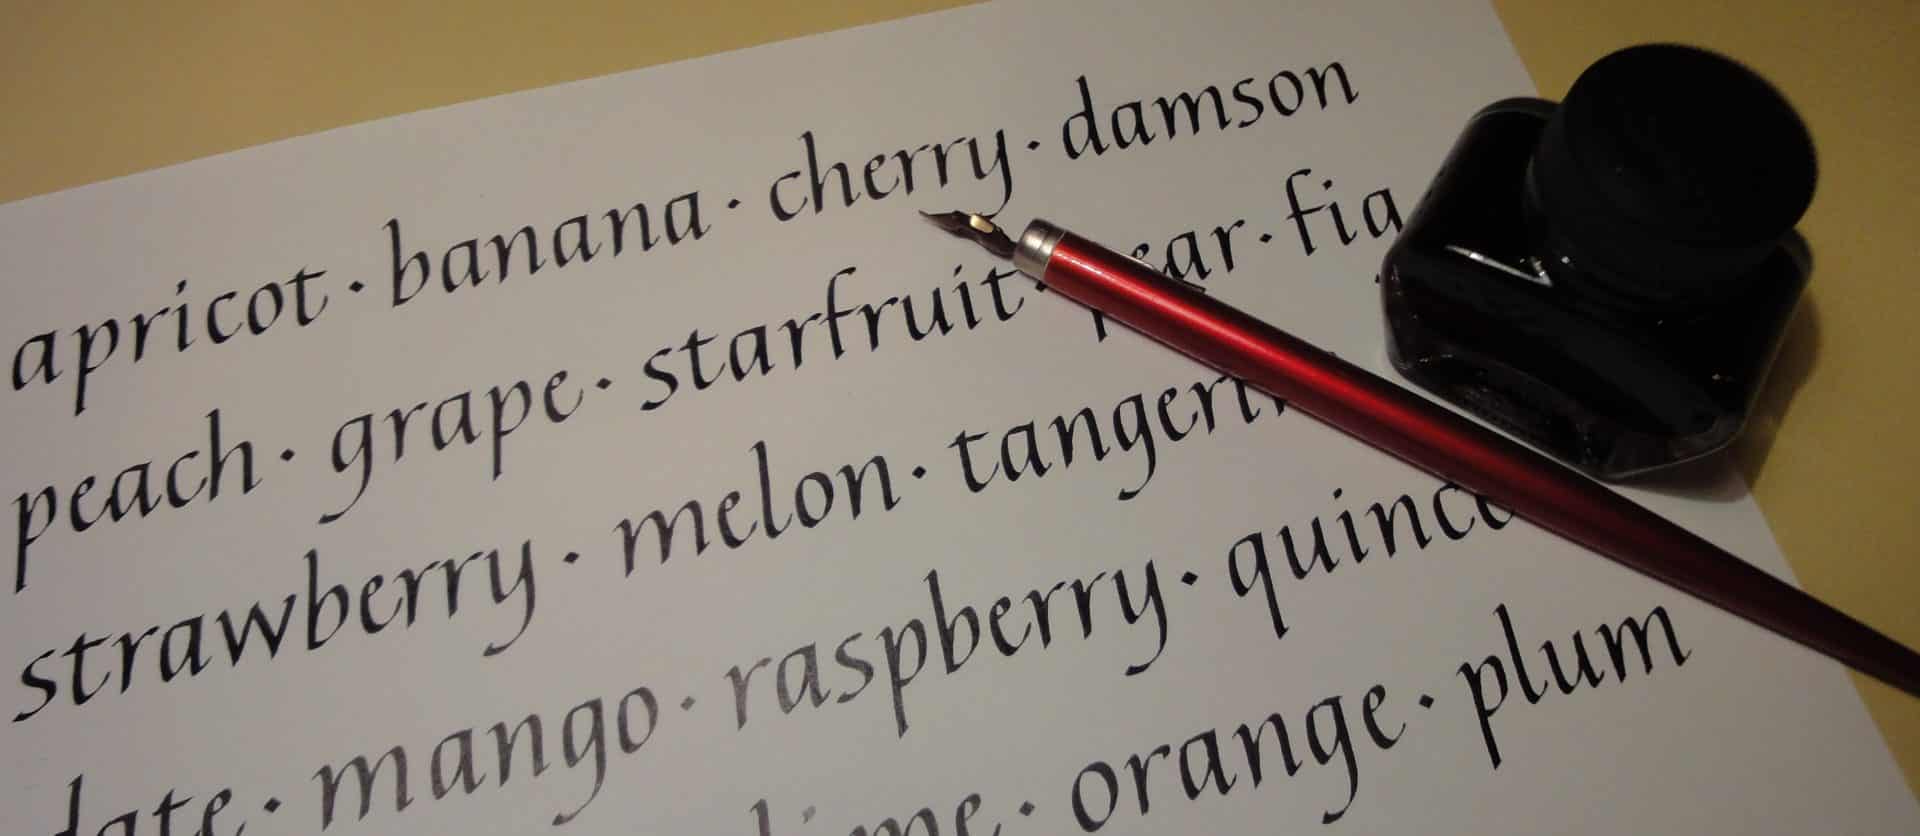 Calligraphic writing - names of fruit with a red calligraphy pen on top of the writing.